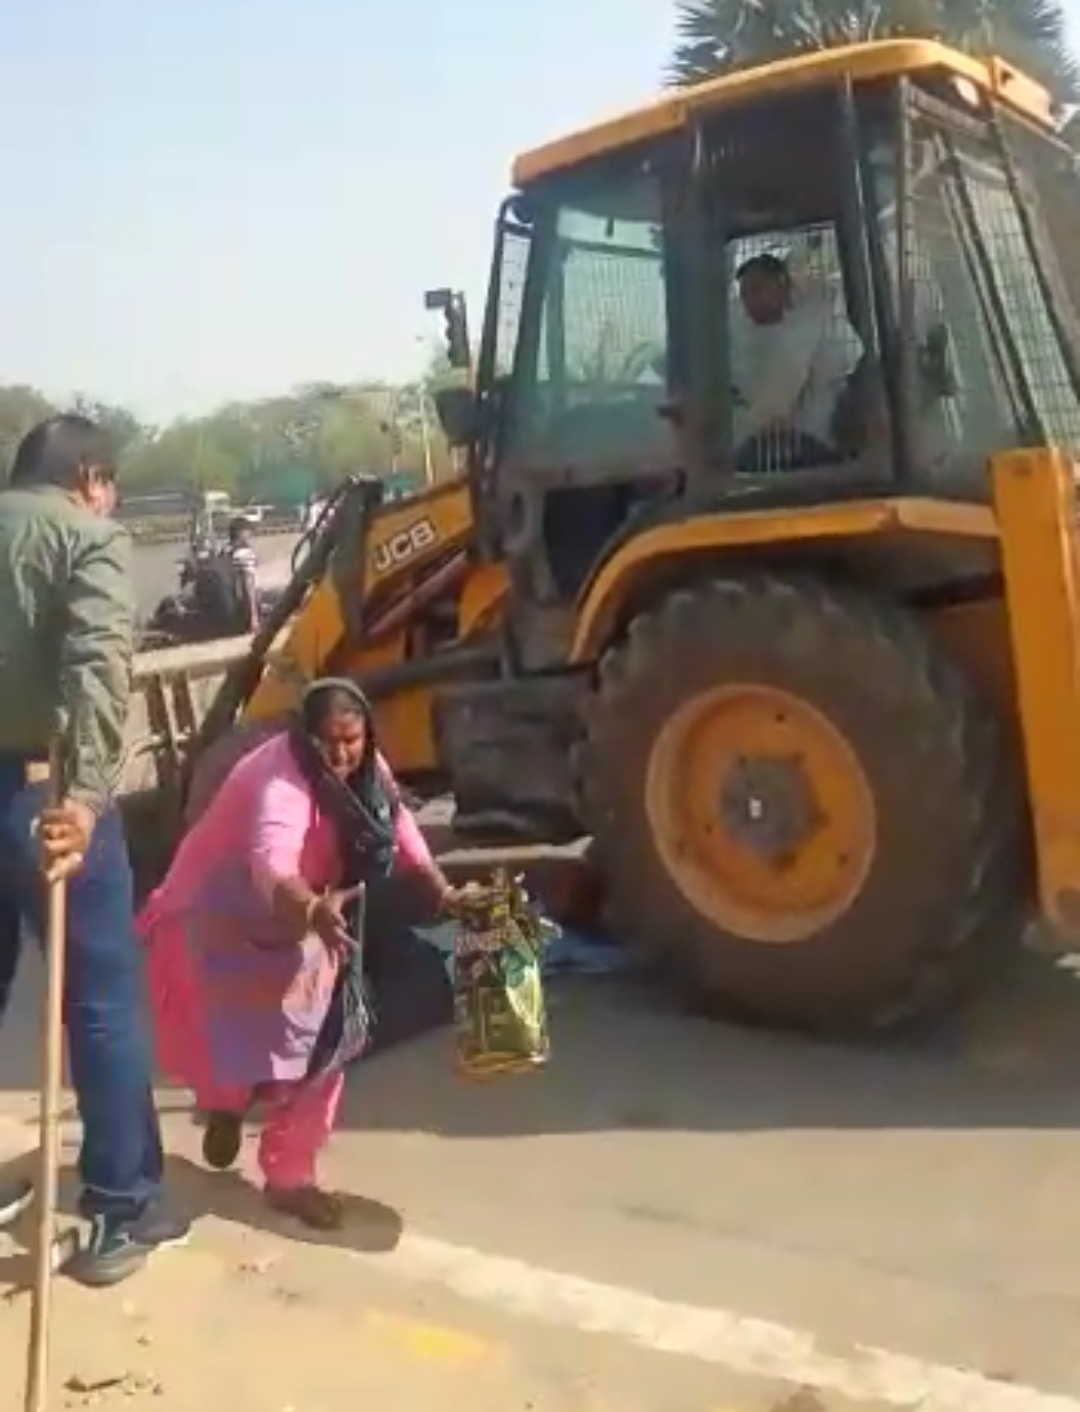 Officers snatched employment of poor selling water at Pari Chowk bulldozers run on water carts